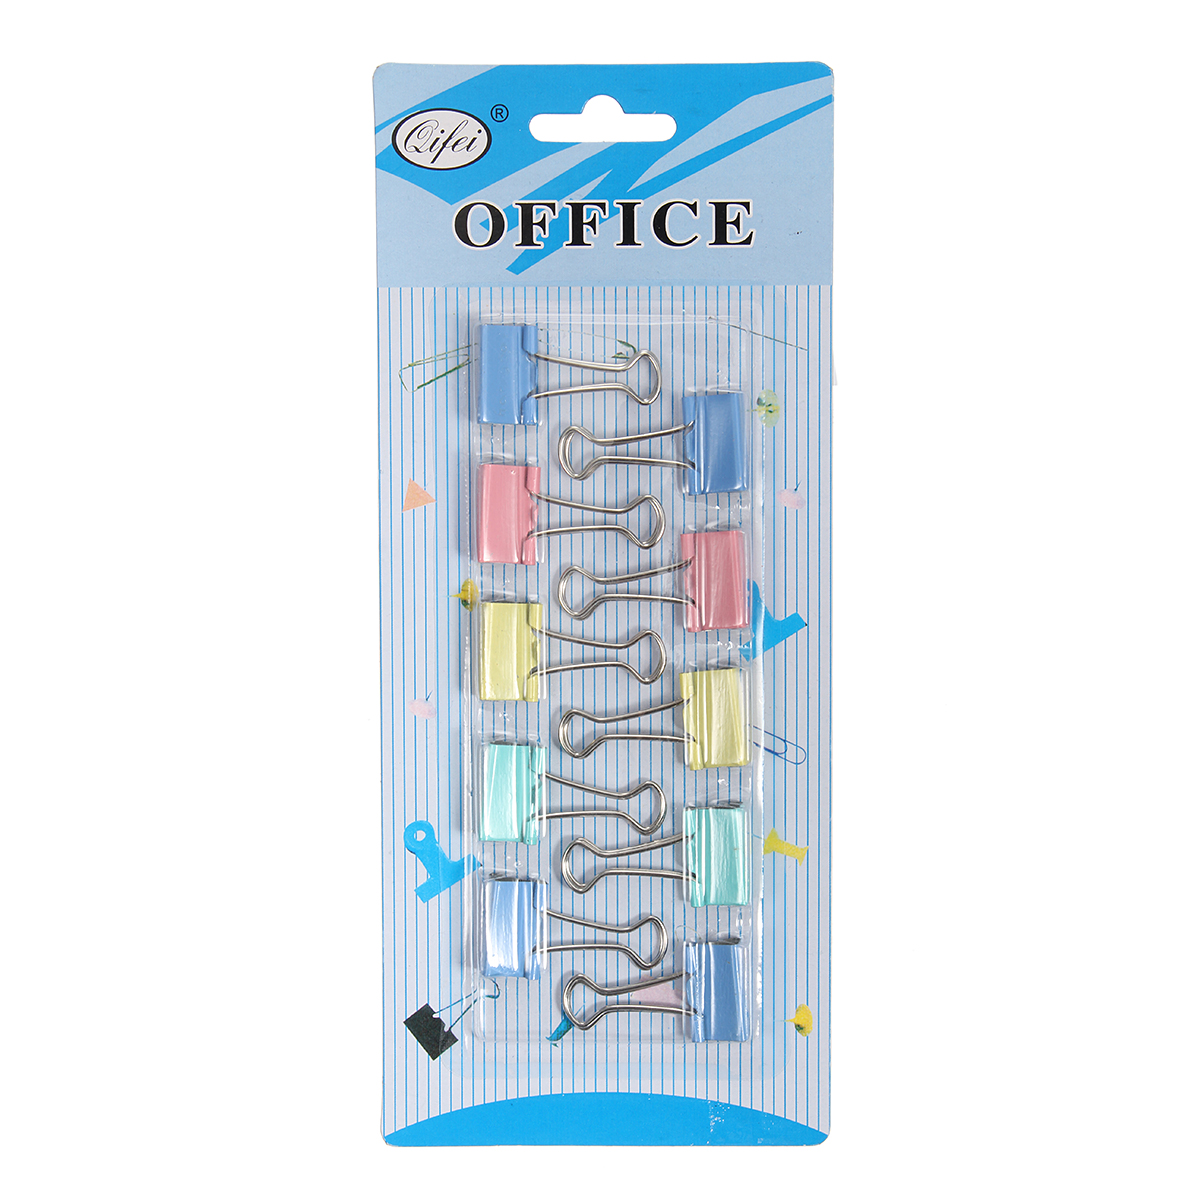 

10 Pcs Small Size Funny Style Colorful Metal Binder Clips Paper Clip Office School Binding Supplies